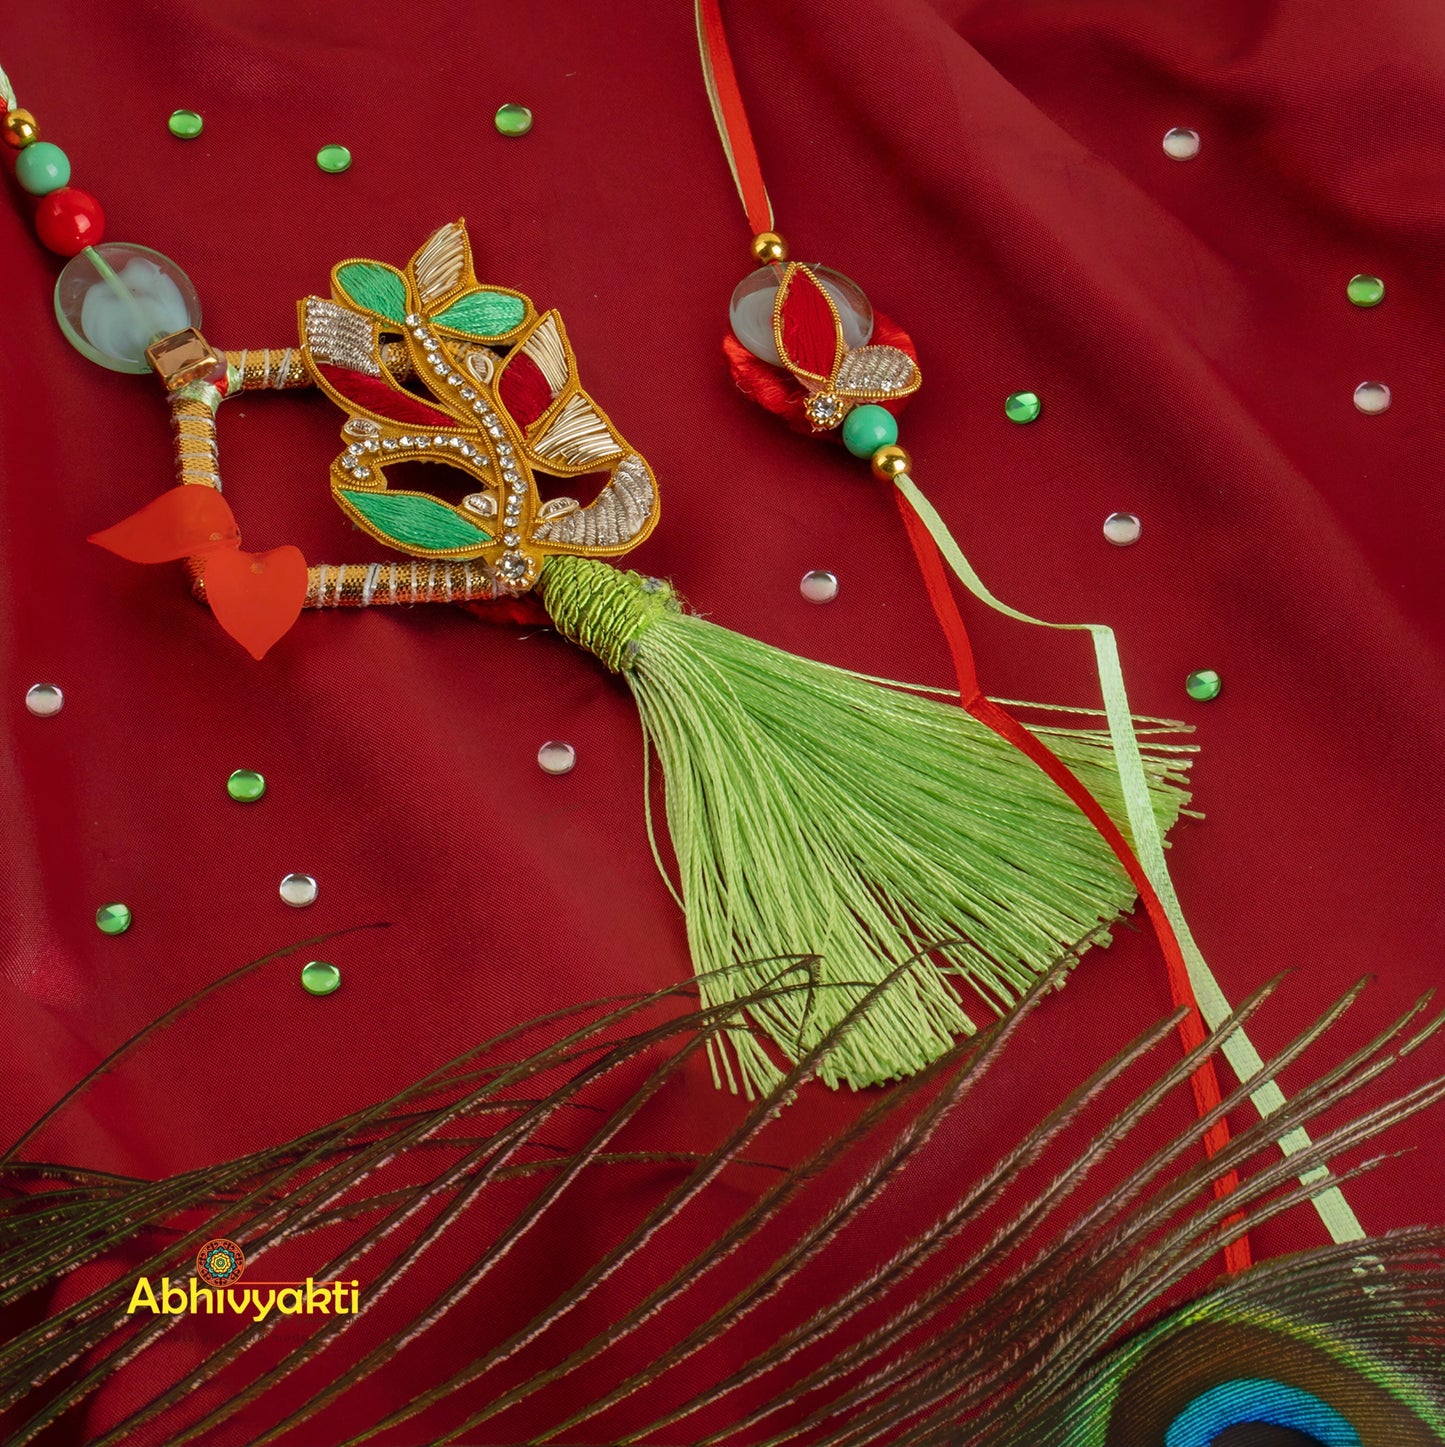 Colorful peacock feather and red/green Rakhi lumba necklace adorned with stones and beads.